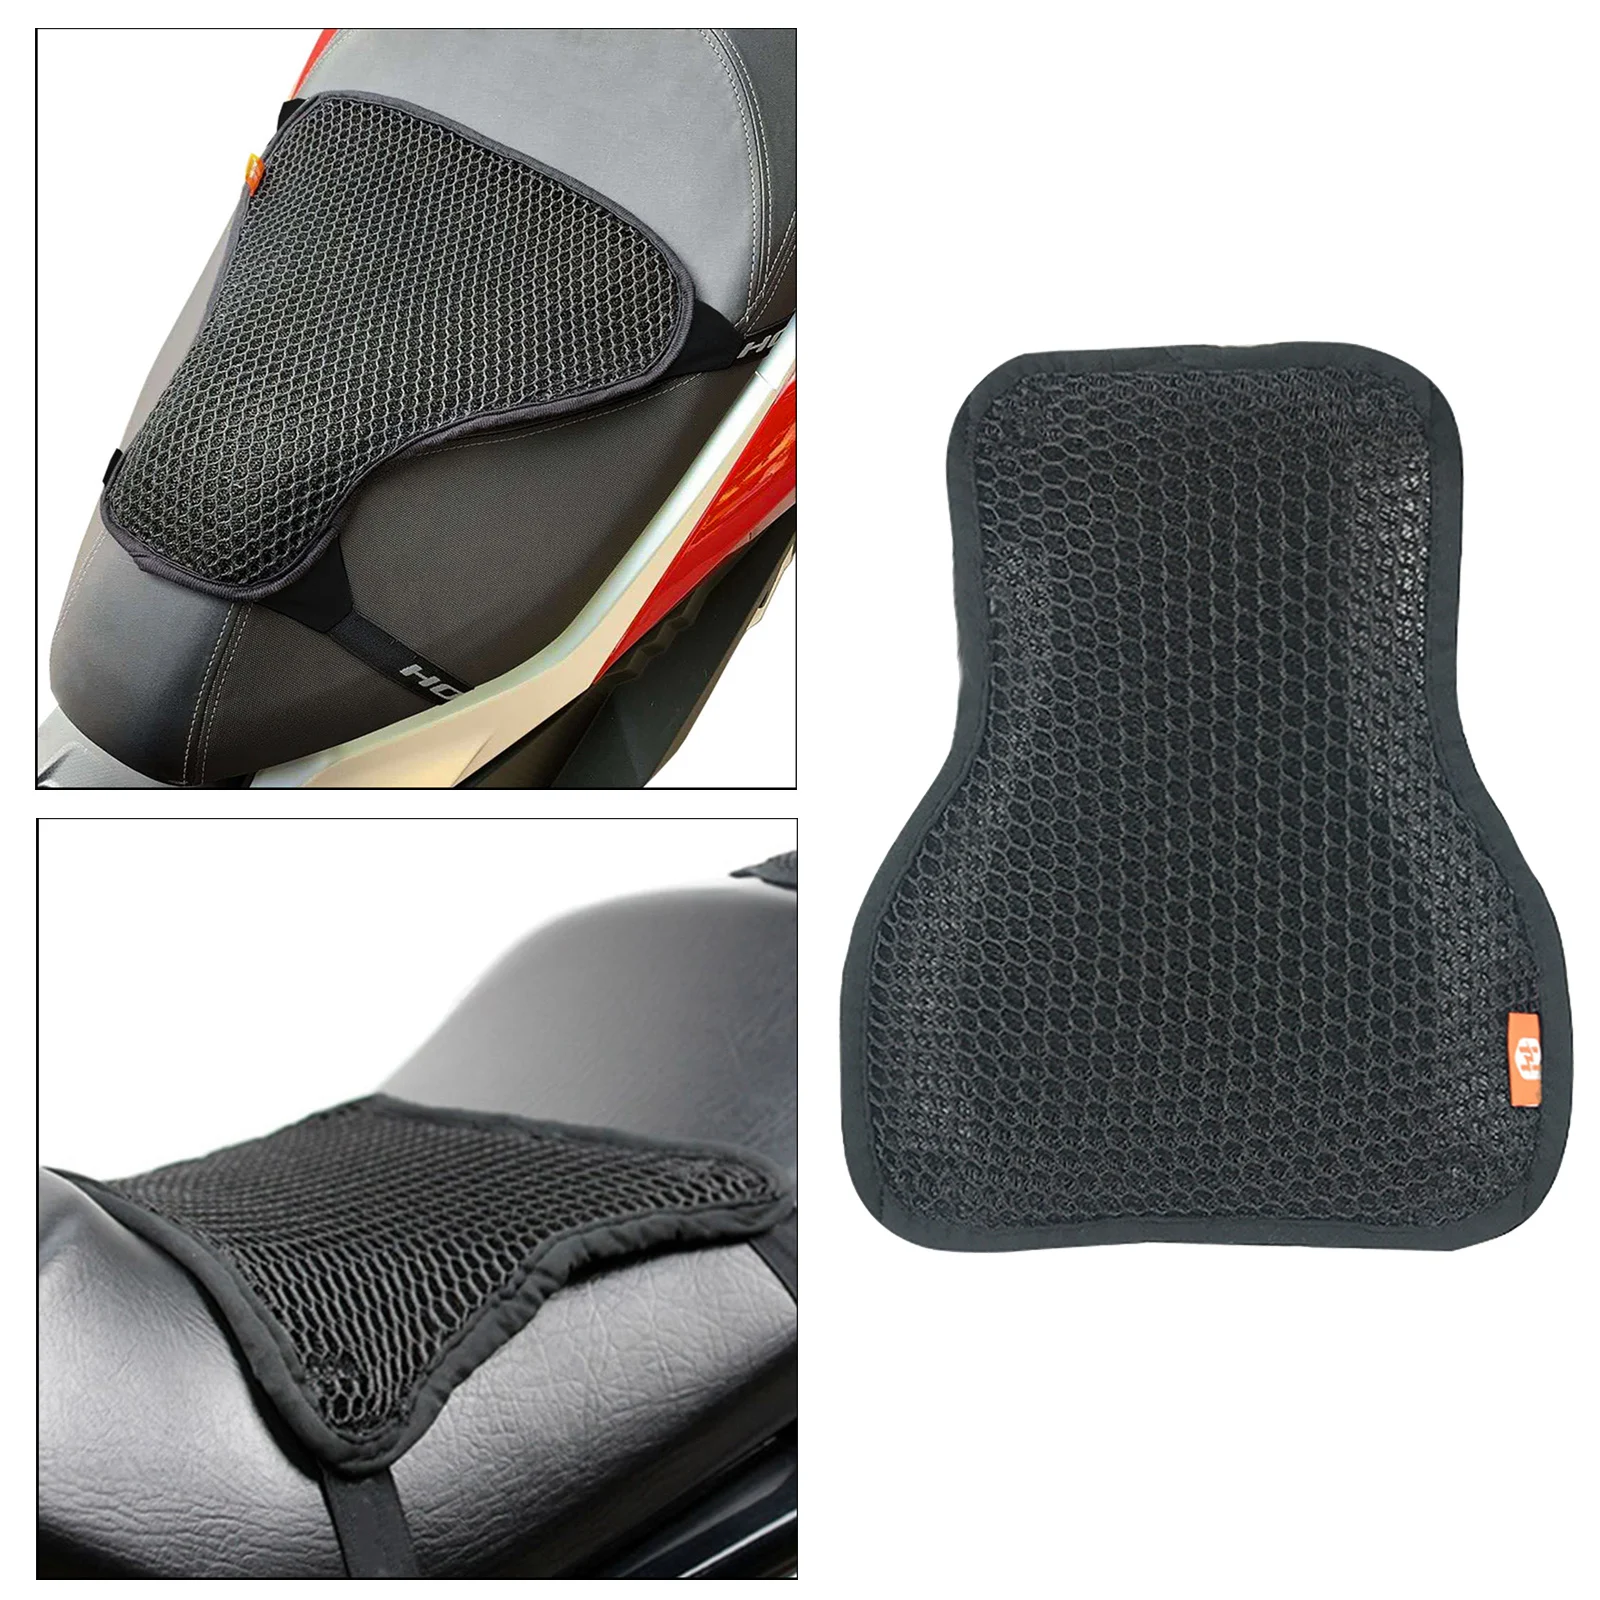 Motorcycle Seat Cushion Butt Protector Cover Reduces Pressure and Fatigue Makes Long Rides More Comfortable